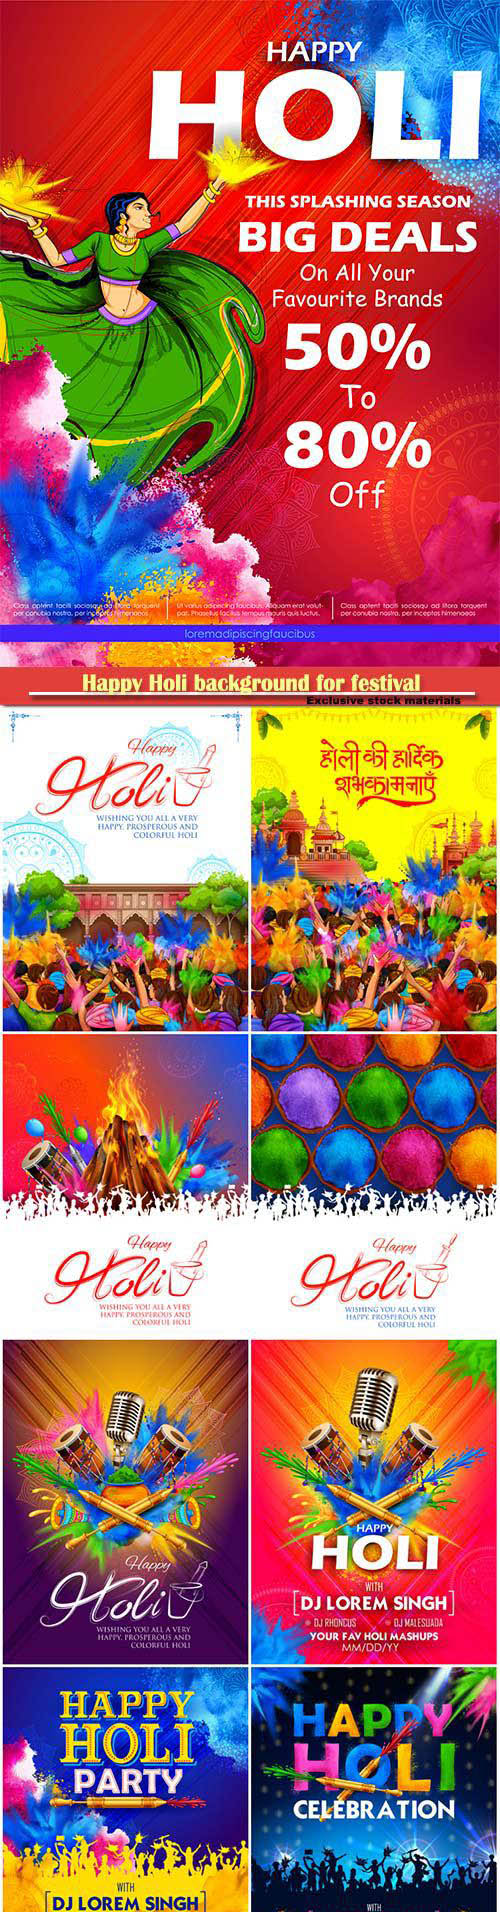 Happy Holi background for festival of colors celebration greetings